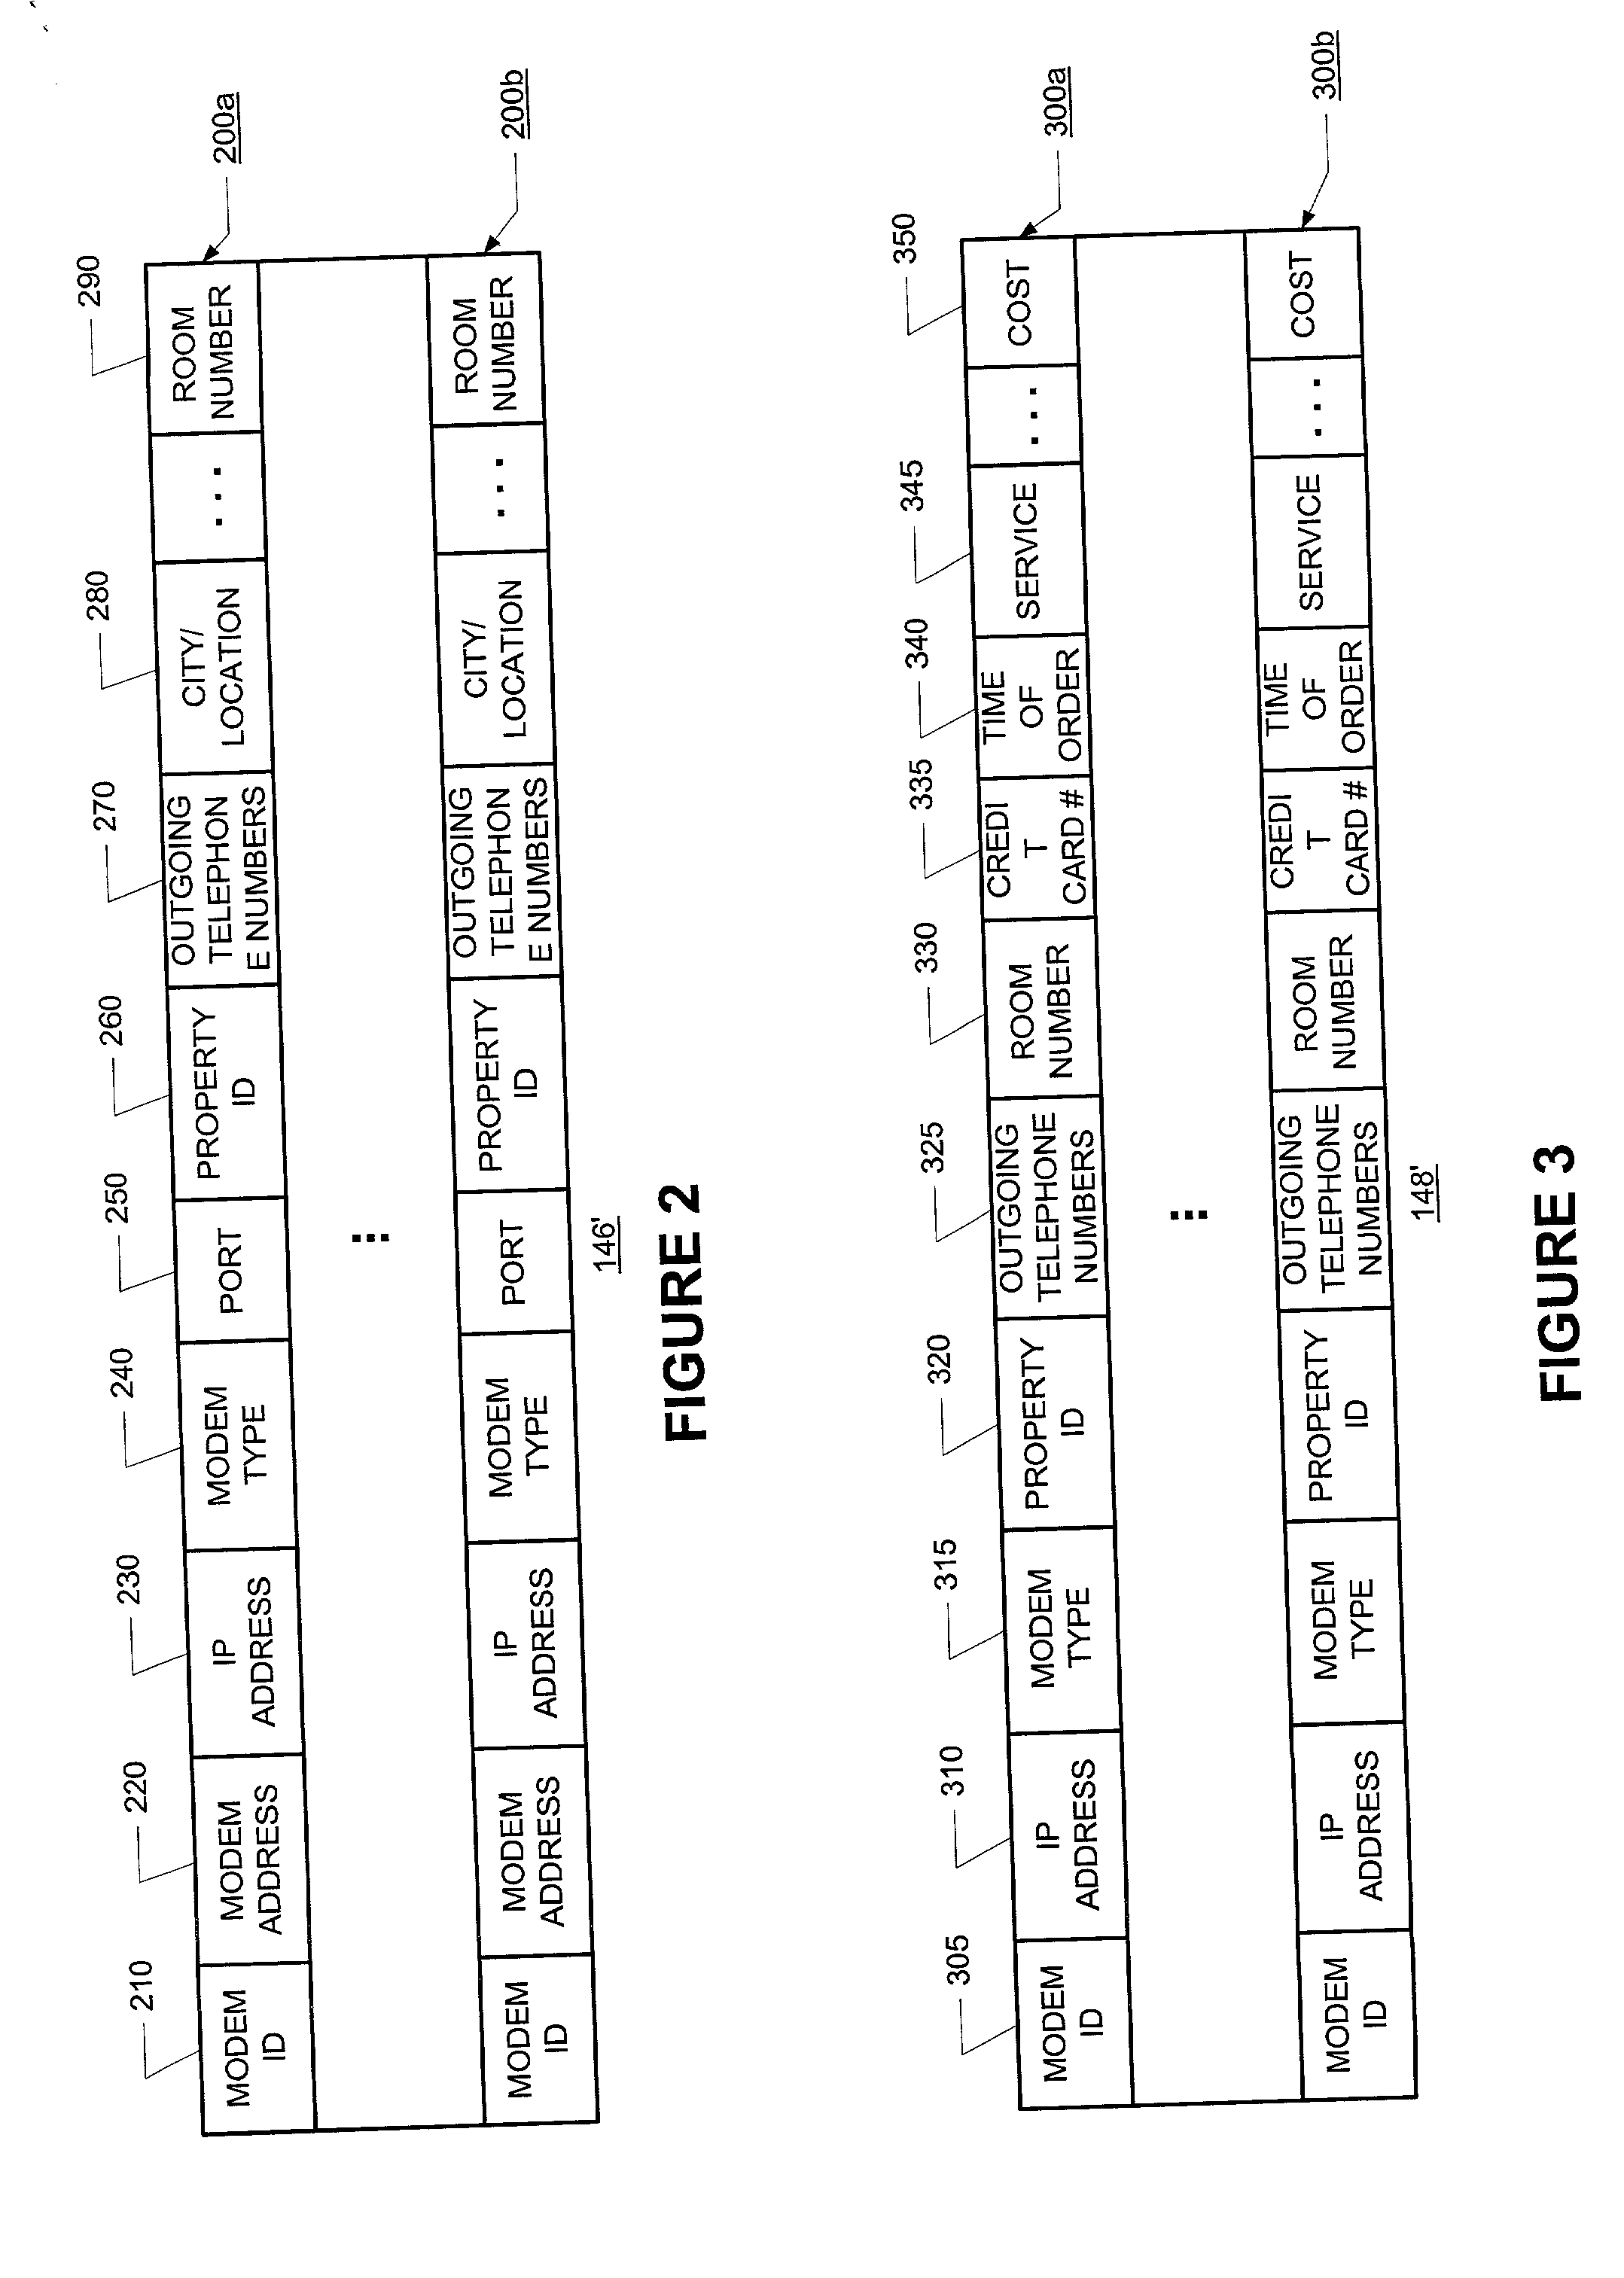 Methods and apparatus for providing high-speed internet access to a device consecutively accessible to different people at different times